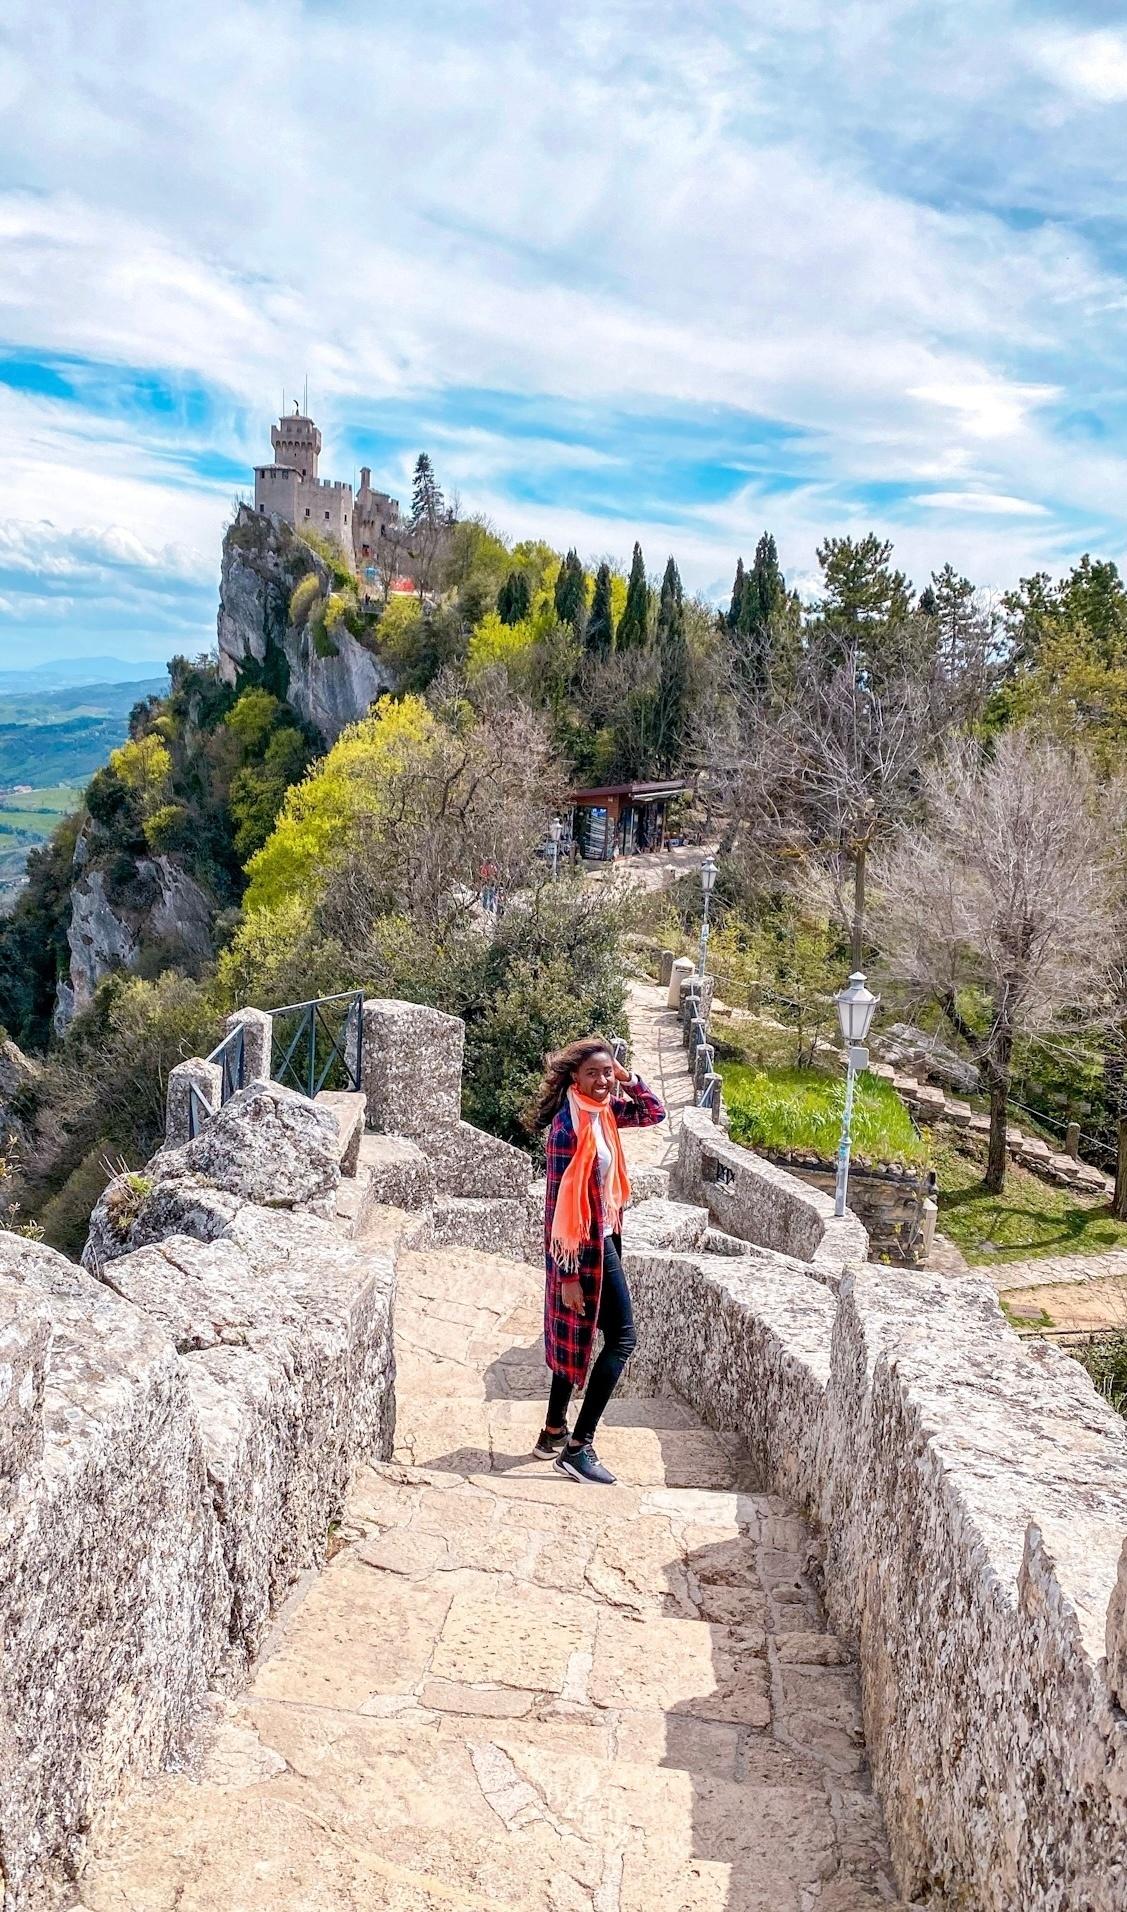 Natalie in San Marino, Europe - Personal archive